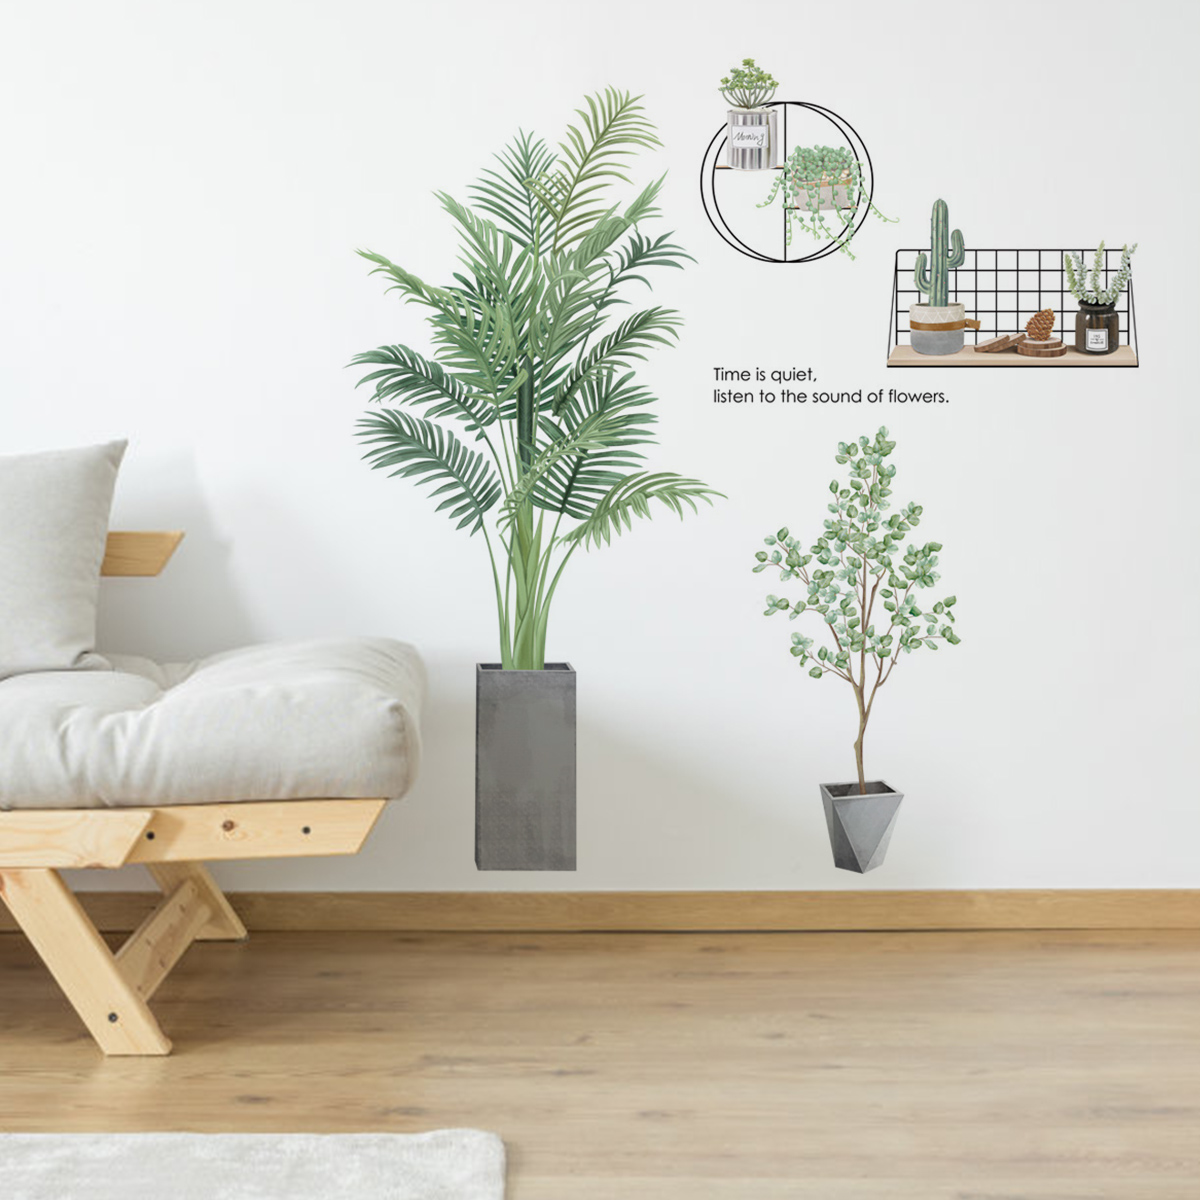 Green-Leaves-Wall-Stickers-Waterproof-Removable-Wall-Decal-Home-Office-Living-Room-Bedroom-Wall-Deco-1774850-2